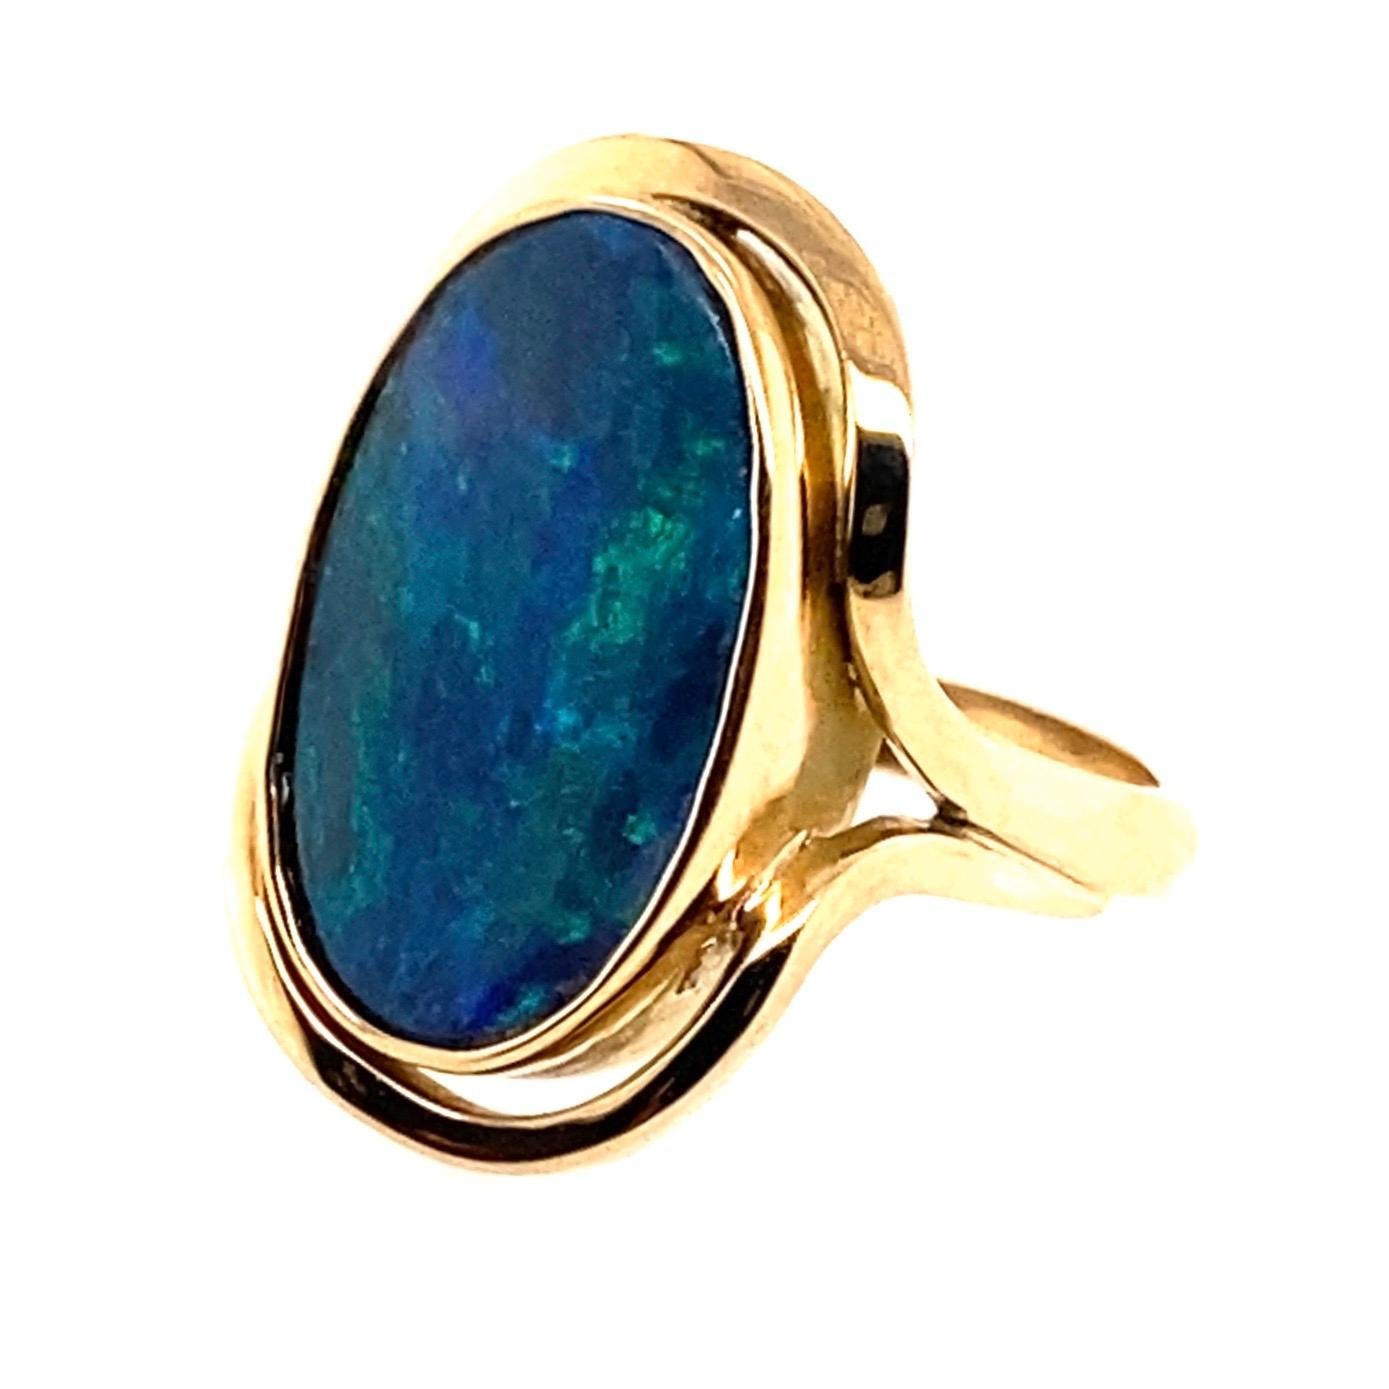 14 Karat Yellow Gold 3.60 Carat Australian Black Opal Cocktail Ring

Handmade 14kt yellow gold ring contains a solid oval cabochon Australian black opal set in a bezel setting. Two curved wires wrap around the center stone. Band stamped 14ct,